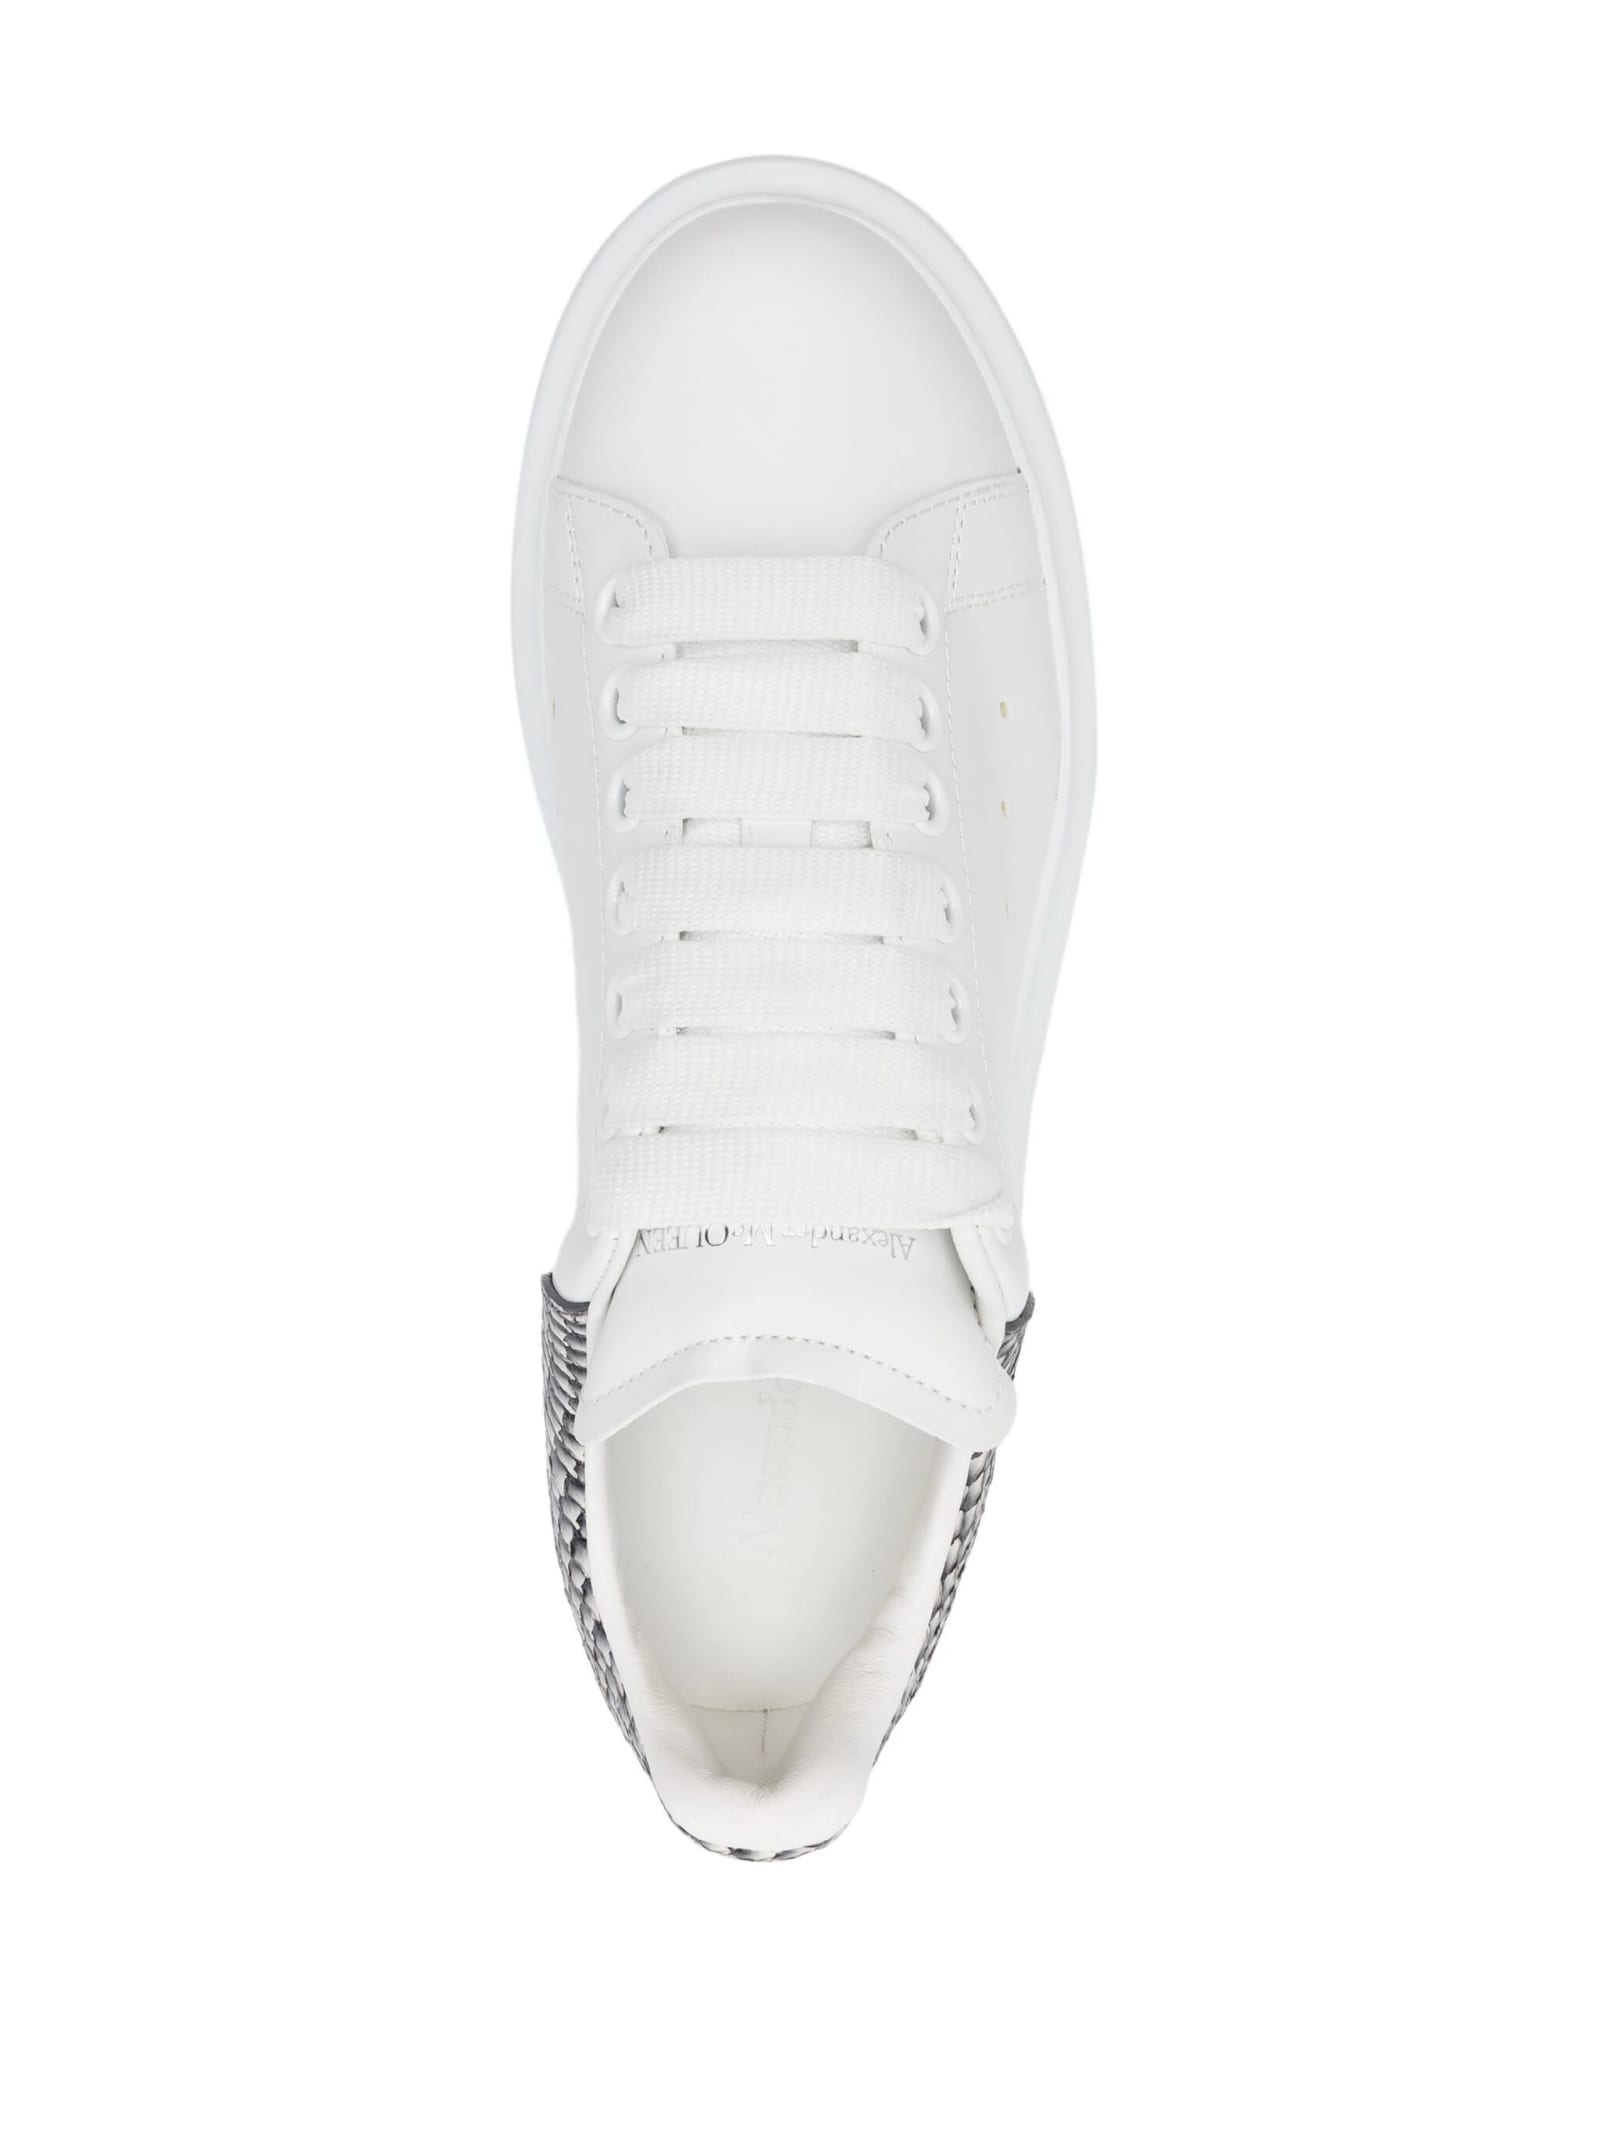 Shop Alexander Mcqueen White Oversized Sneakers With Snake Print Spoiler